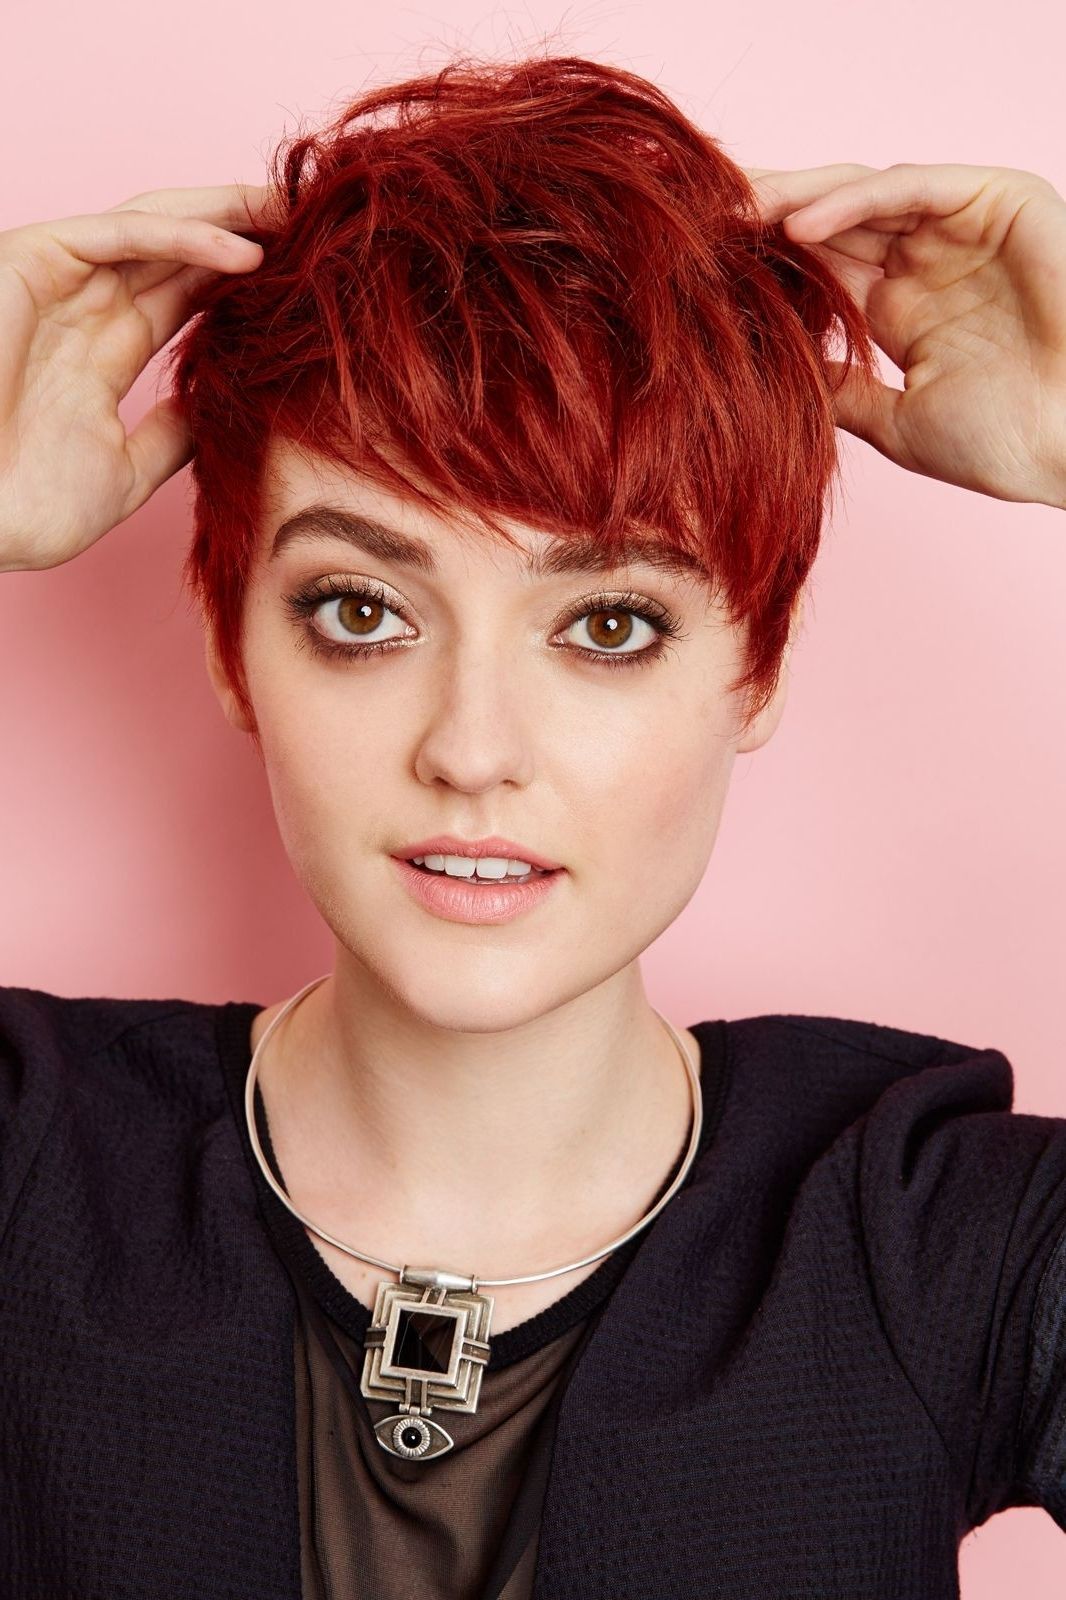 Pixie Haircut: 12 Ways To Style The Cut | Stylecaster | Red Pixie Regarding Most Up To Date Red Pixie Hairstyles (View 7 of 15)